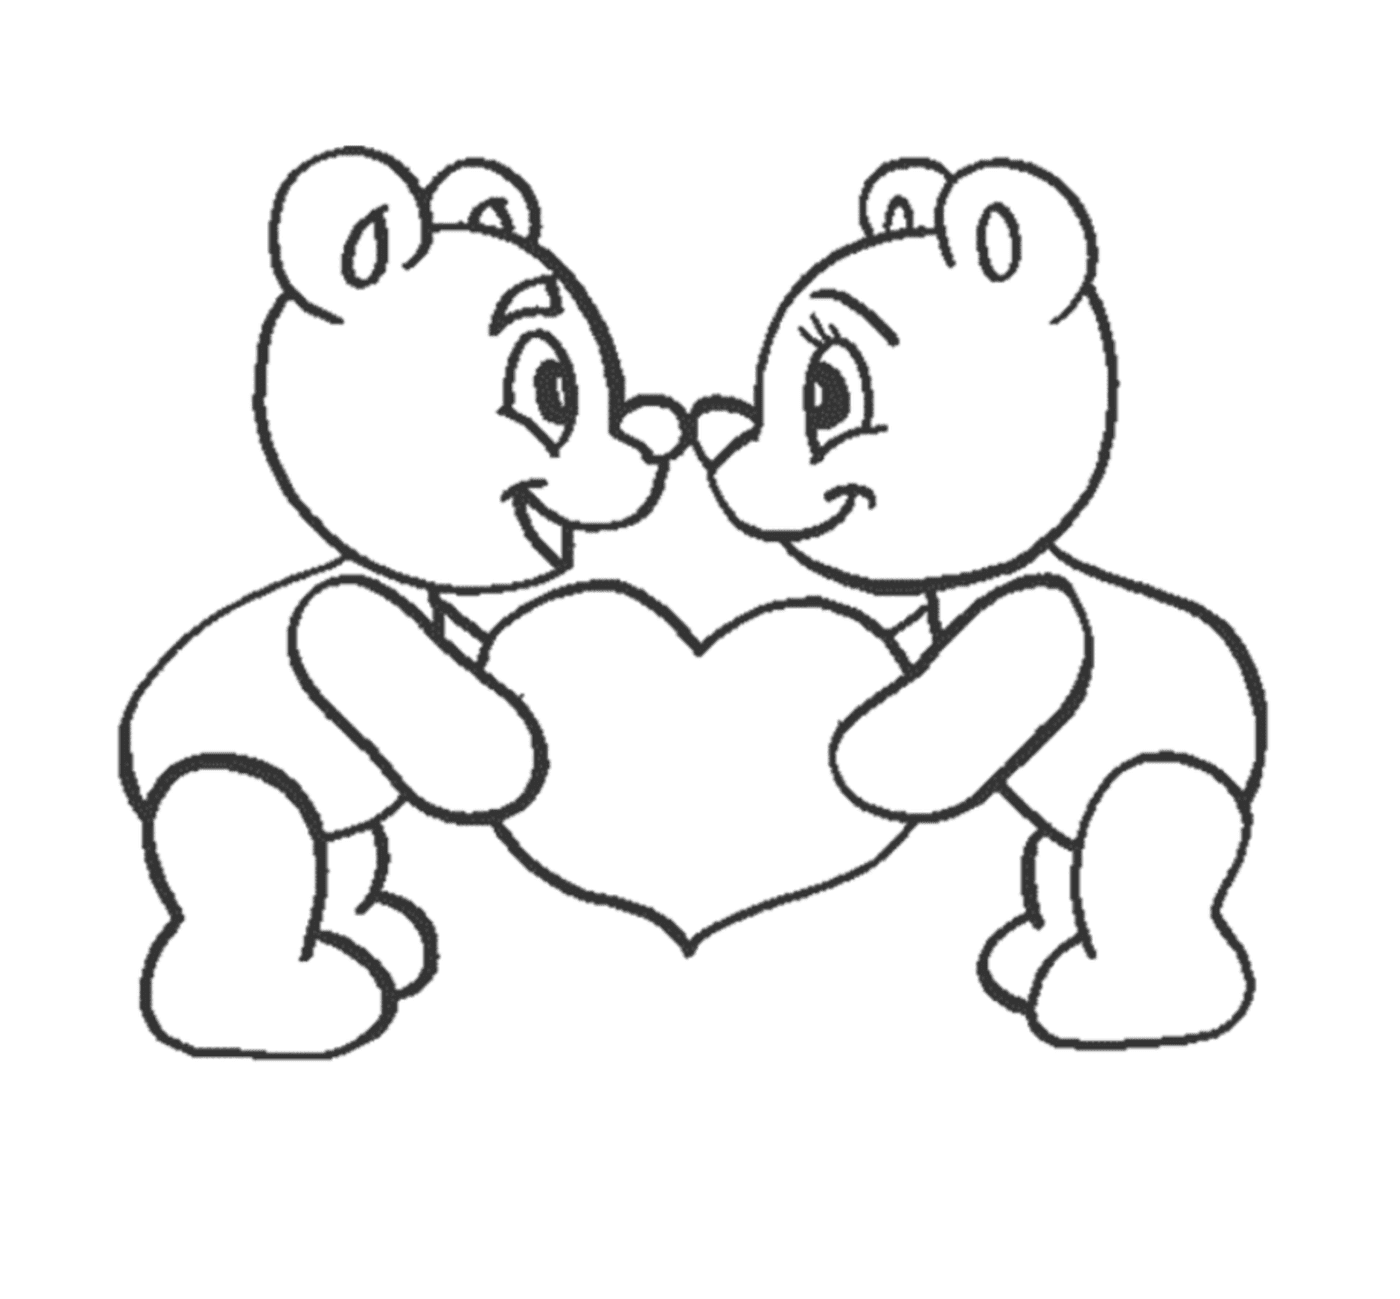  Two teddy bears holding a heart in their hands 